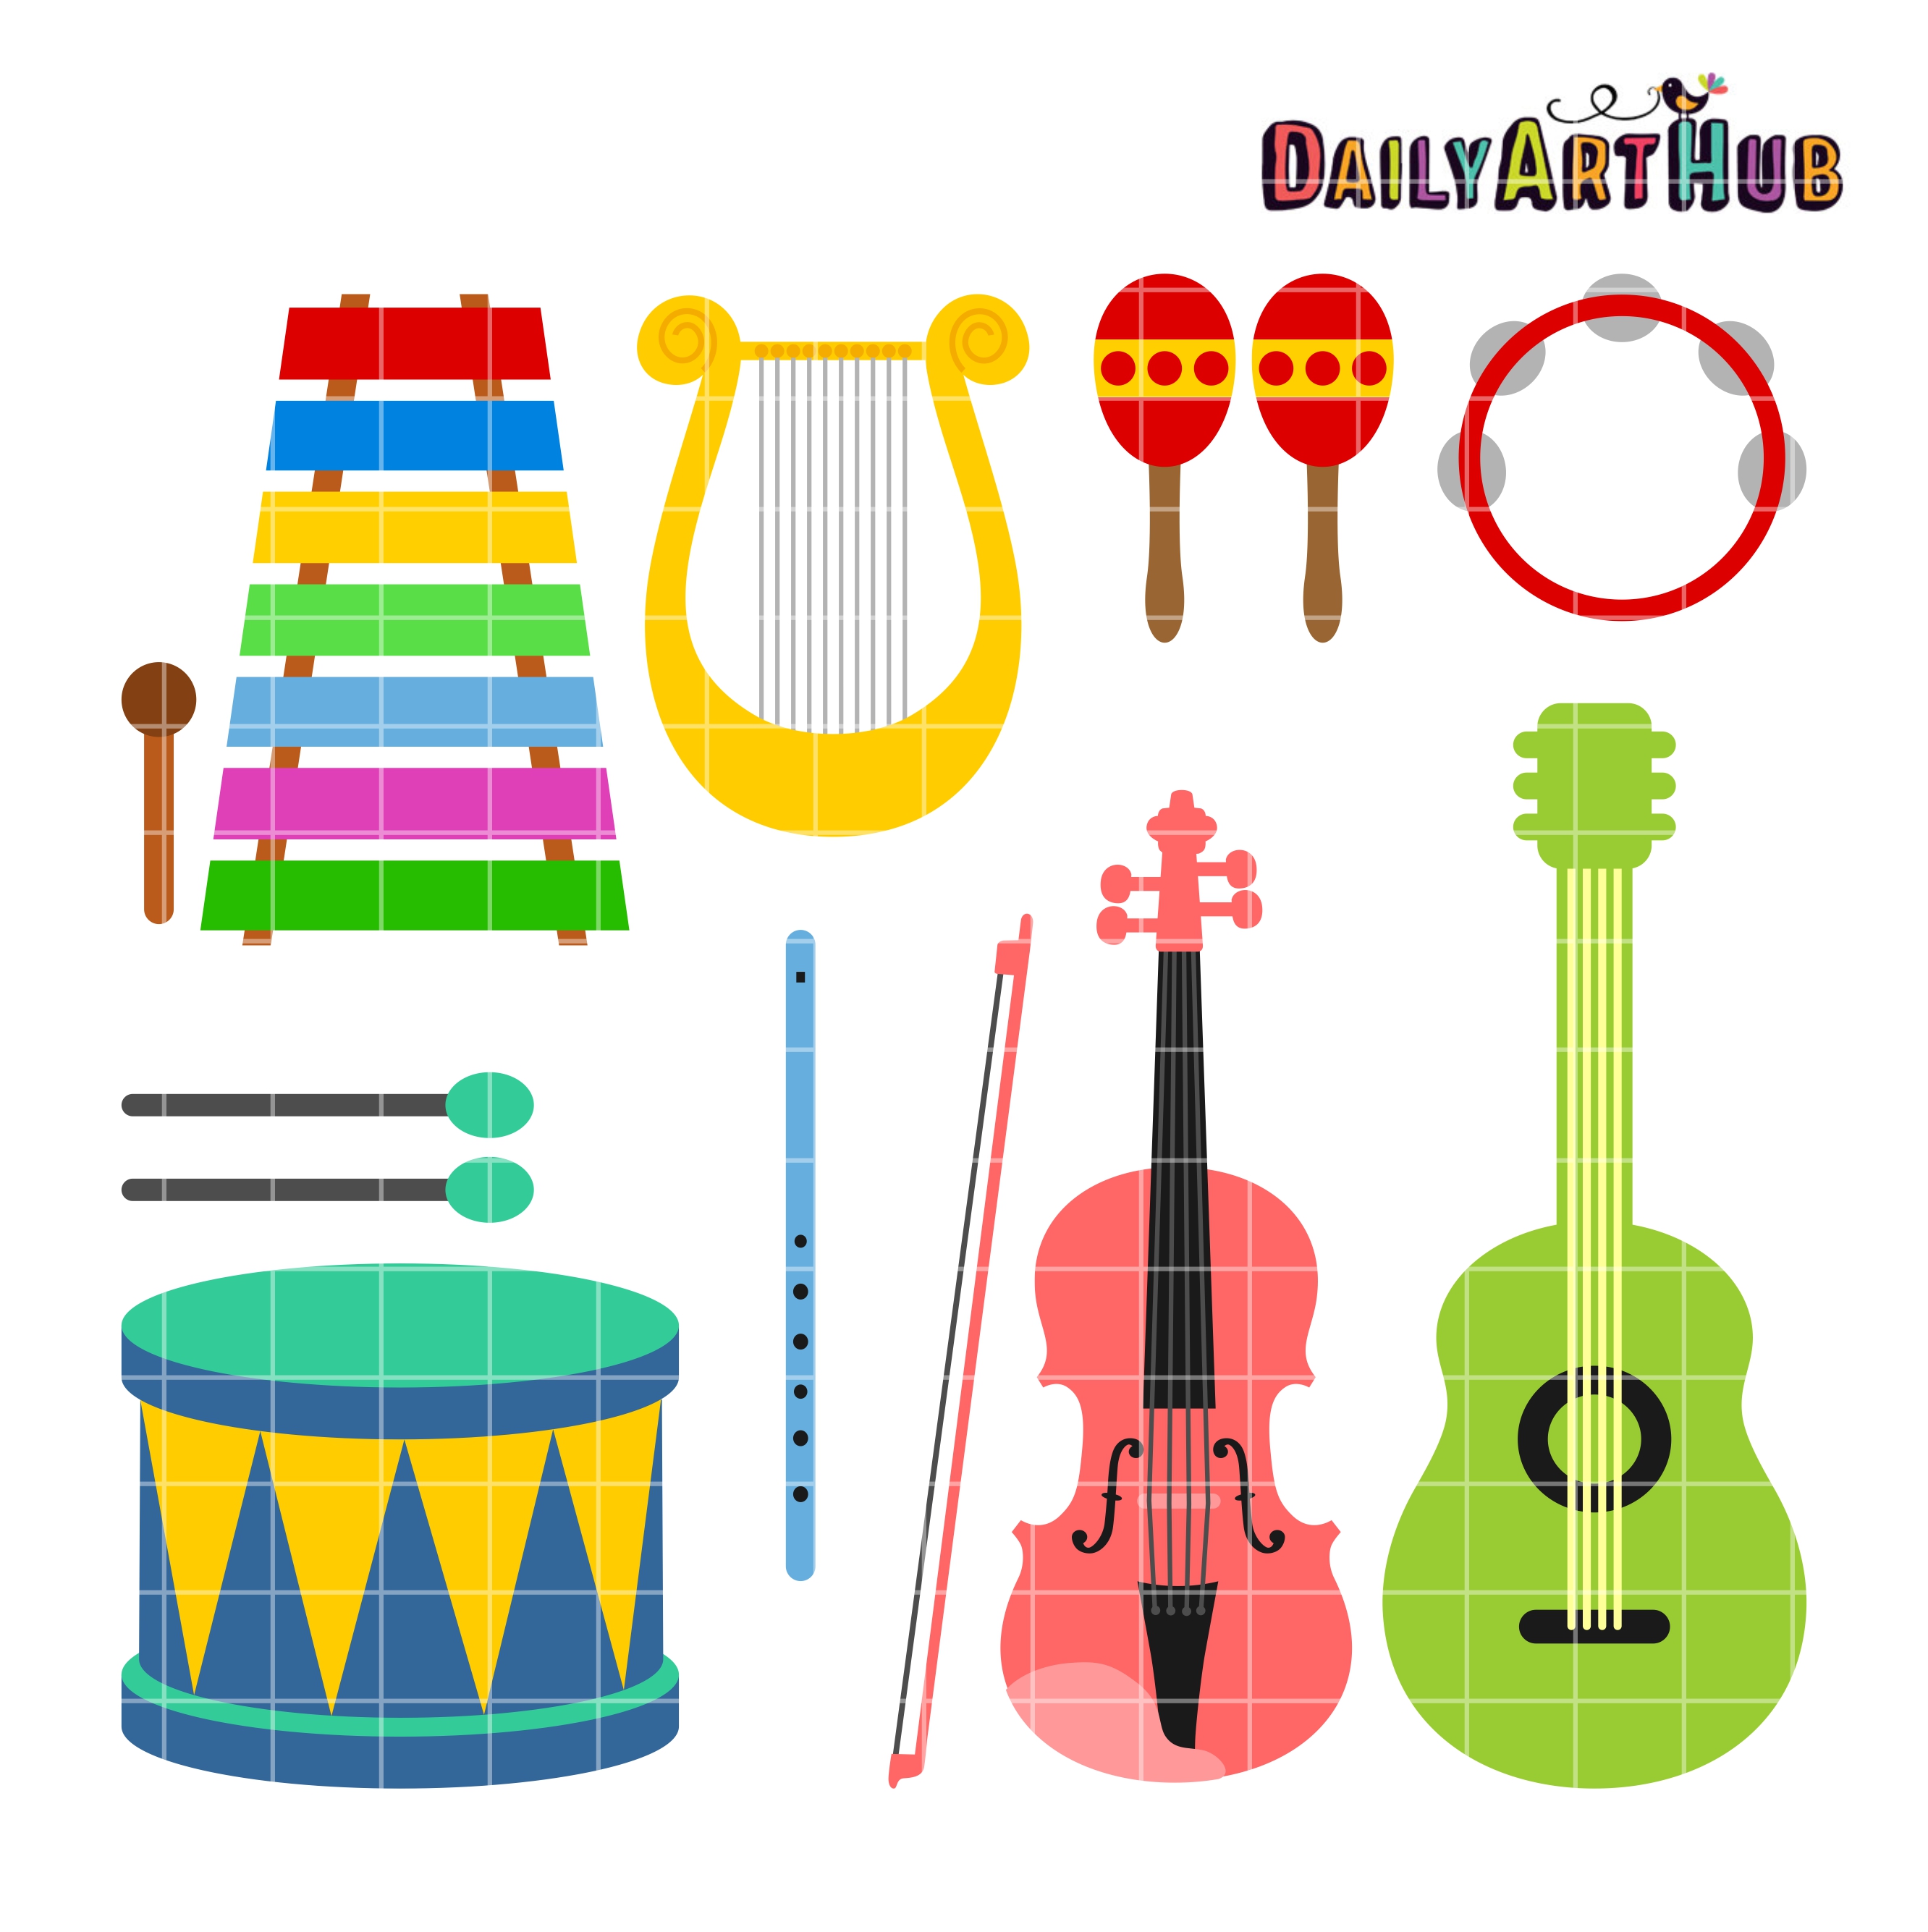 Musical instruments clipart.